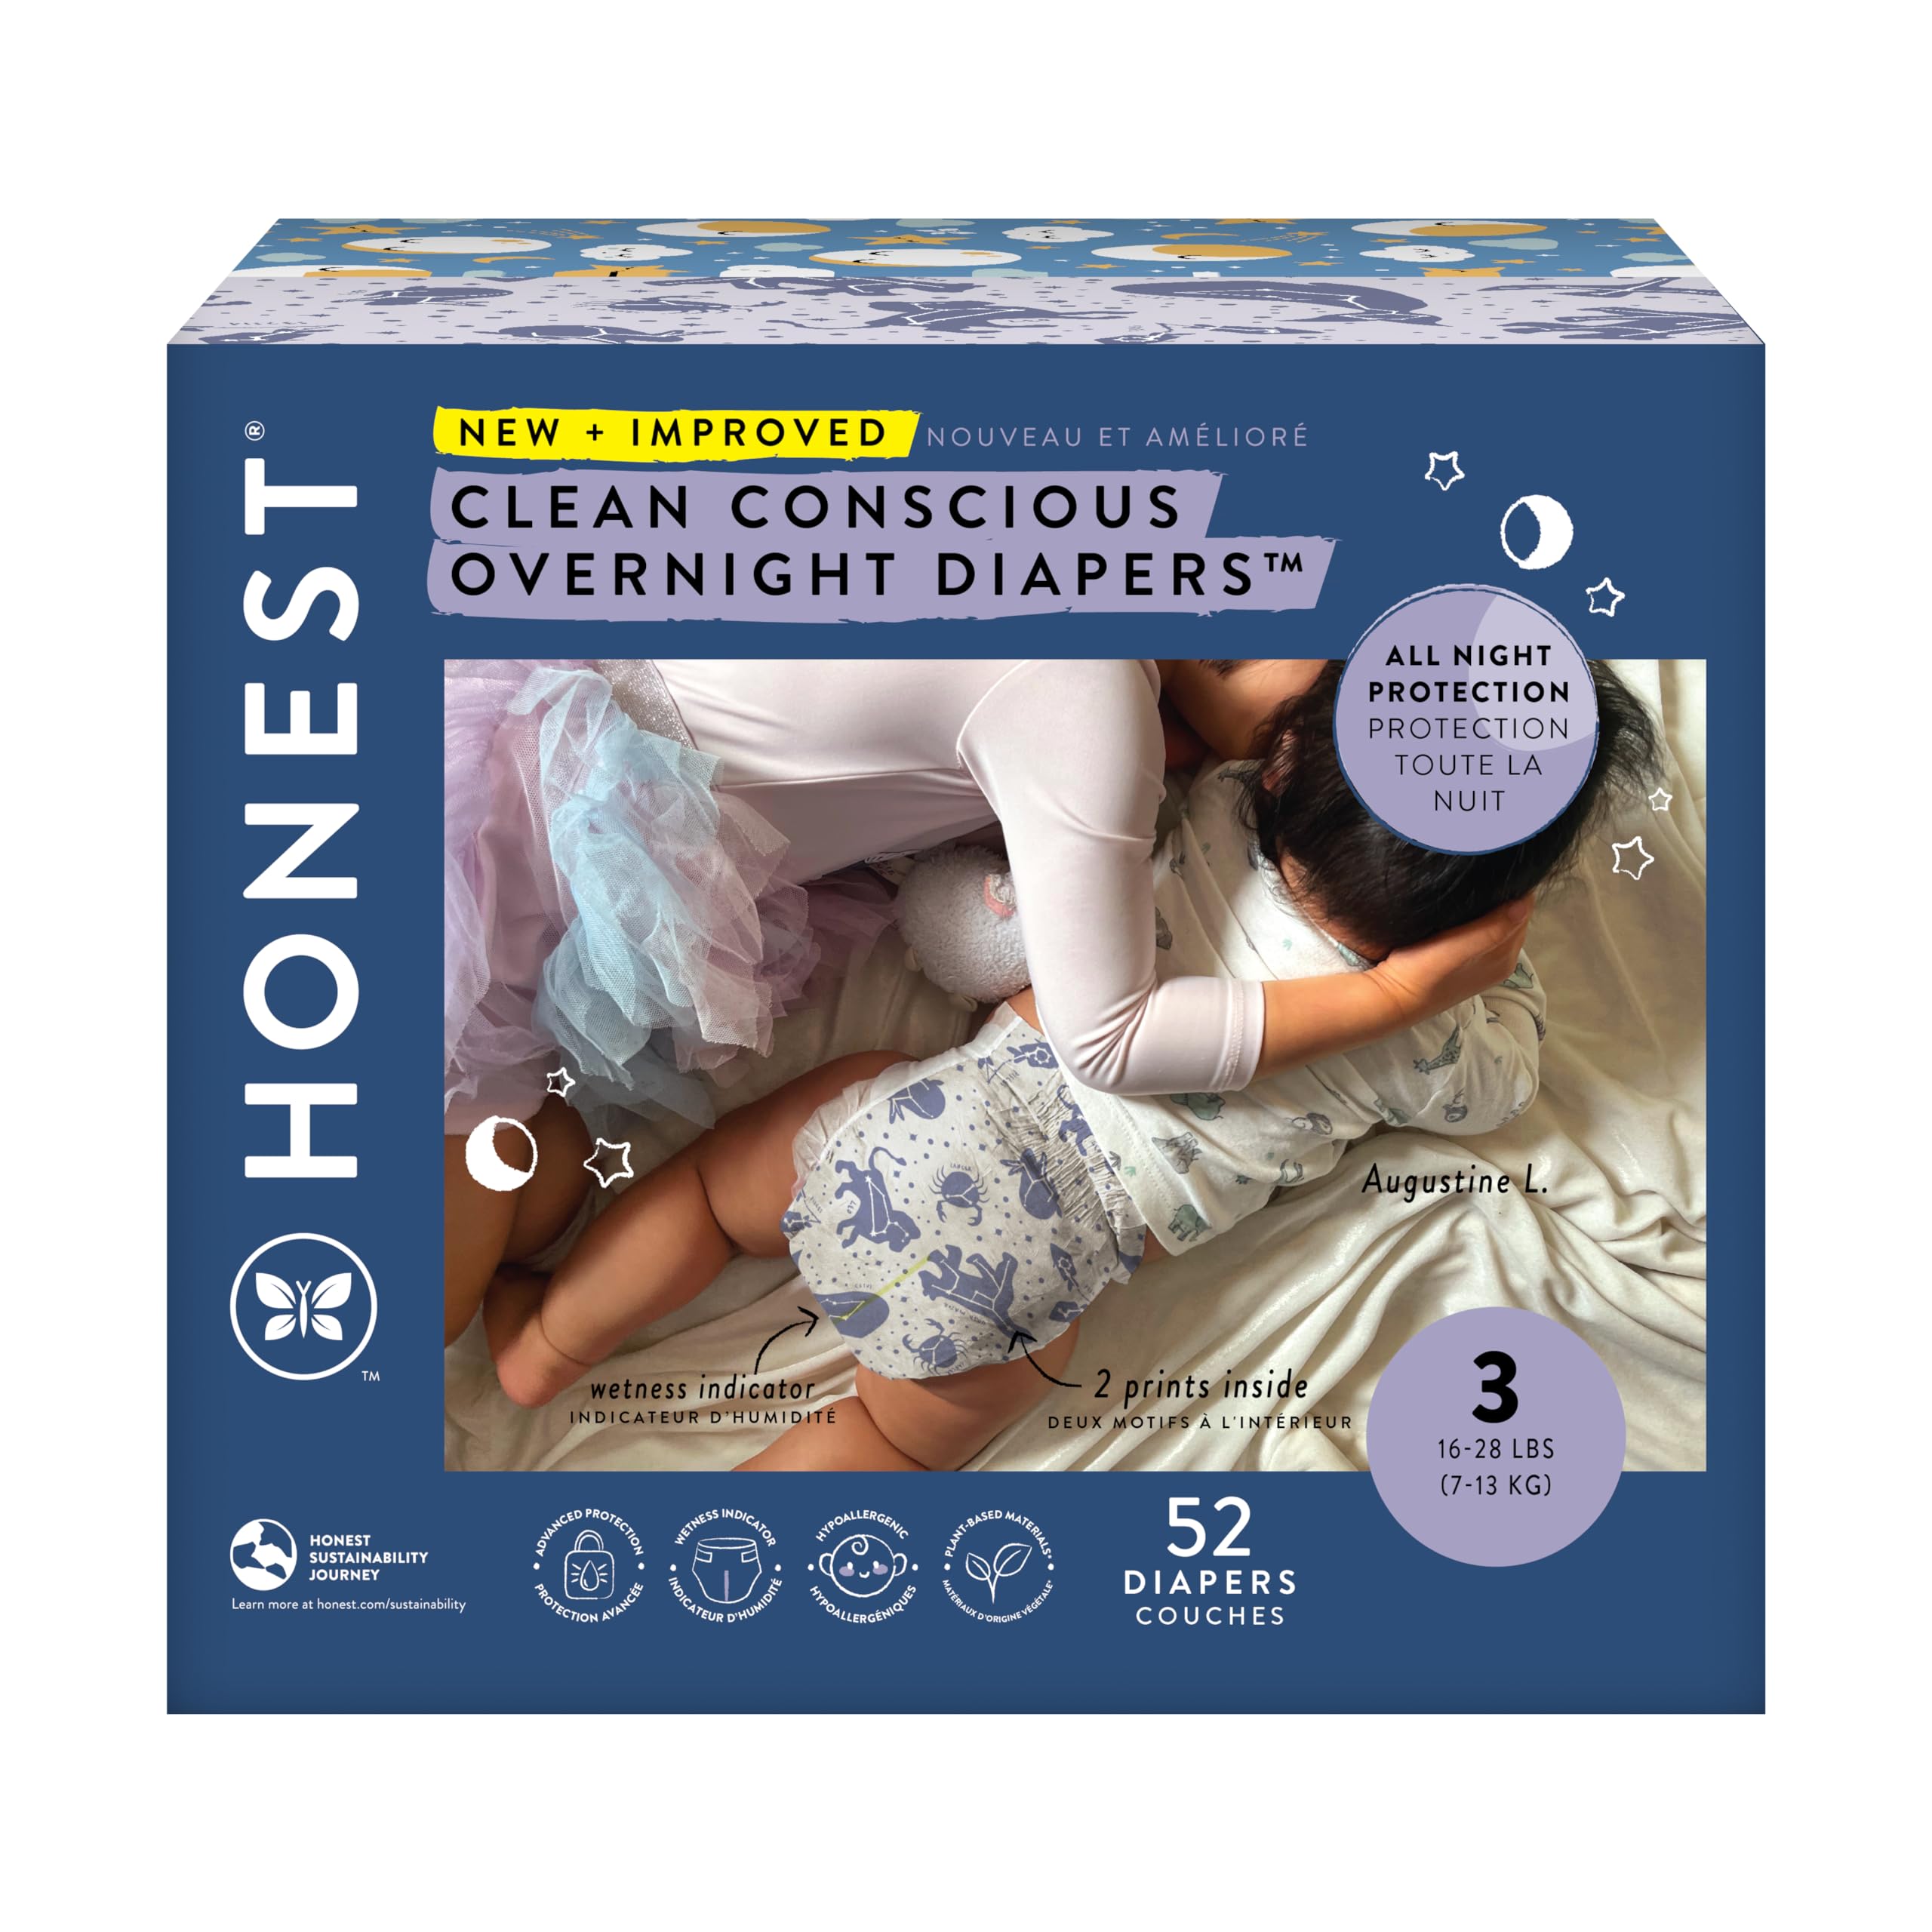 The Honest Company Clean Conscious Overnight Diapers | Plant-Based, Sustainable | Cozy Cloud + Star Signs | Club Box, Size 3 (16-28 lbs), 52 Count